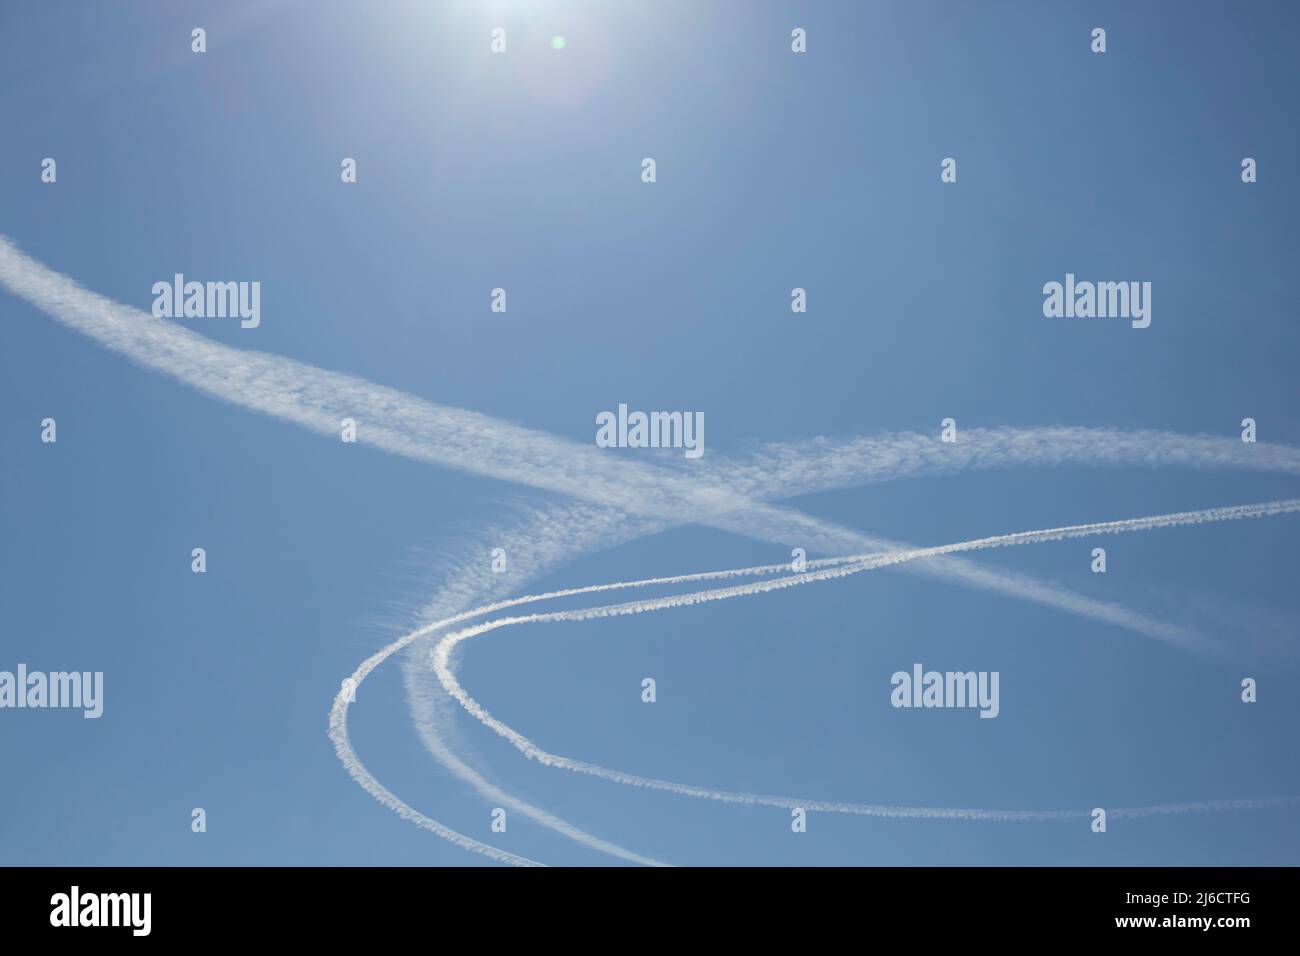 circular condensation trail made from aerial patrol jets Stock Photo